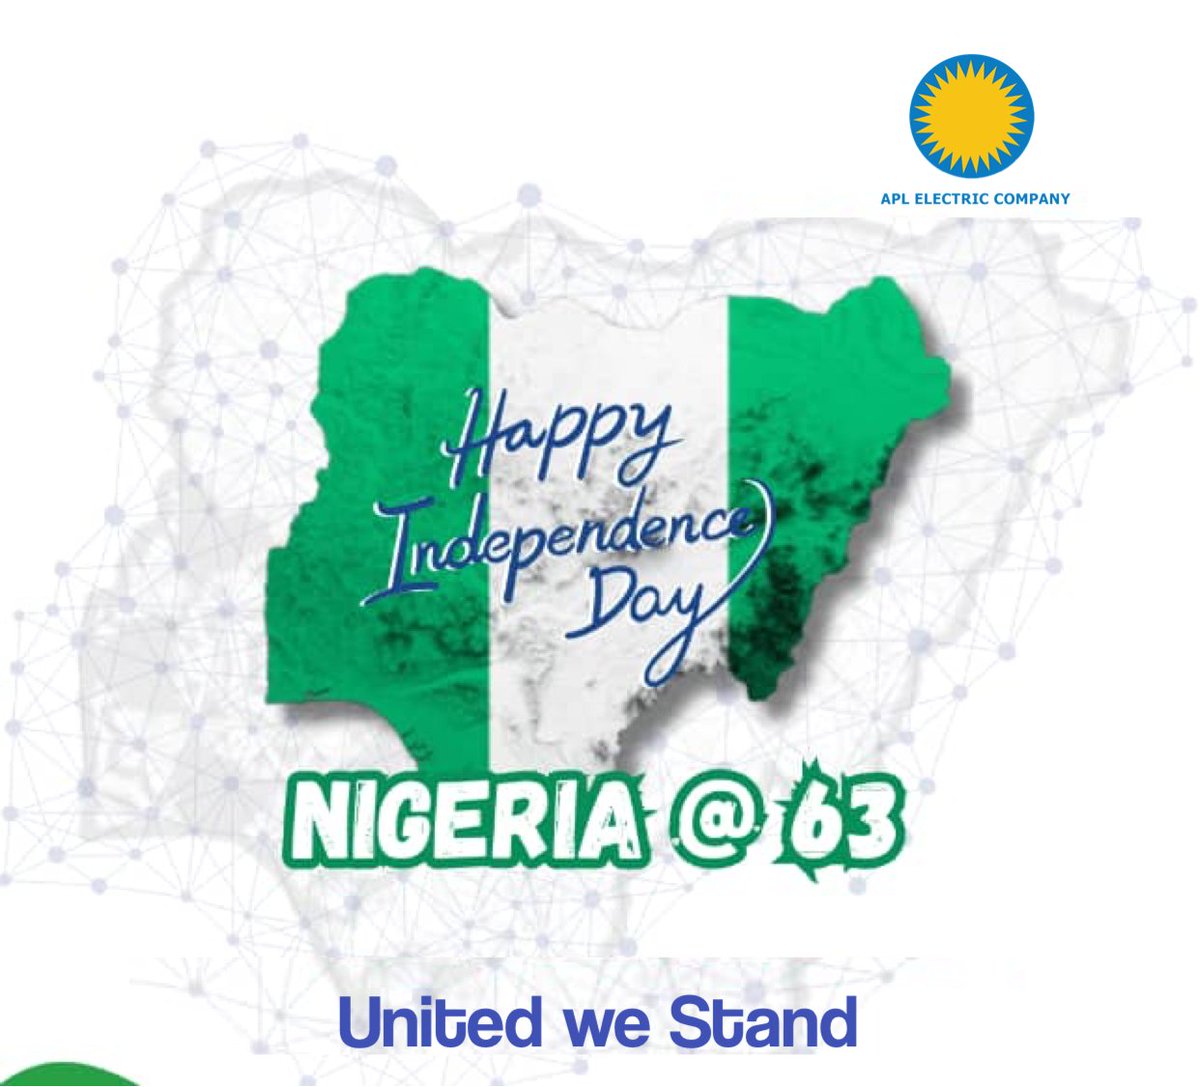 Happy Independence Day, Nigeria! 🇳🇬 As we celebrate the spirit of freedom and unity, ABA Power is committed to powering our great nation towards a brighter, more sustainable future. #NigeriaAt63 #IndependenceDay #PoweringNigeria